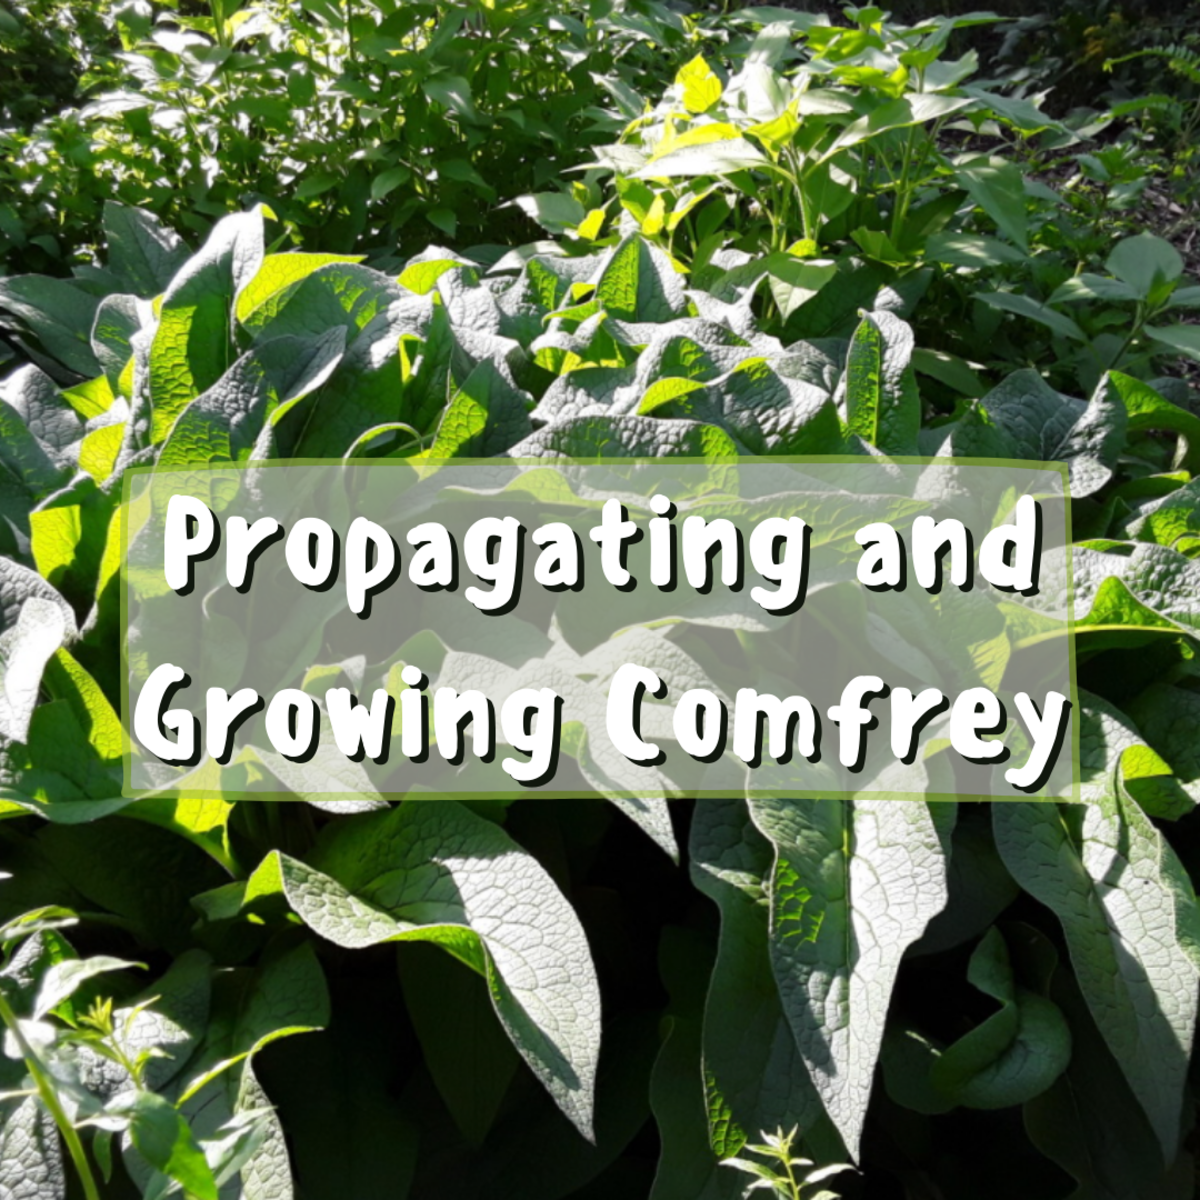 Propagating comfrey is both easy and rewarding! This article will help you through the process of growing and propagating comfrey on your own.